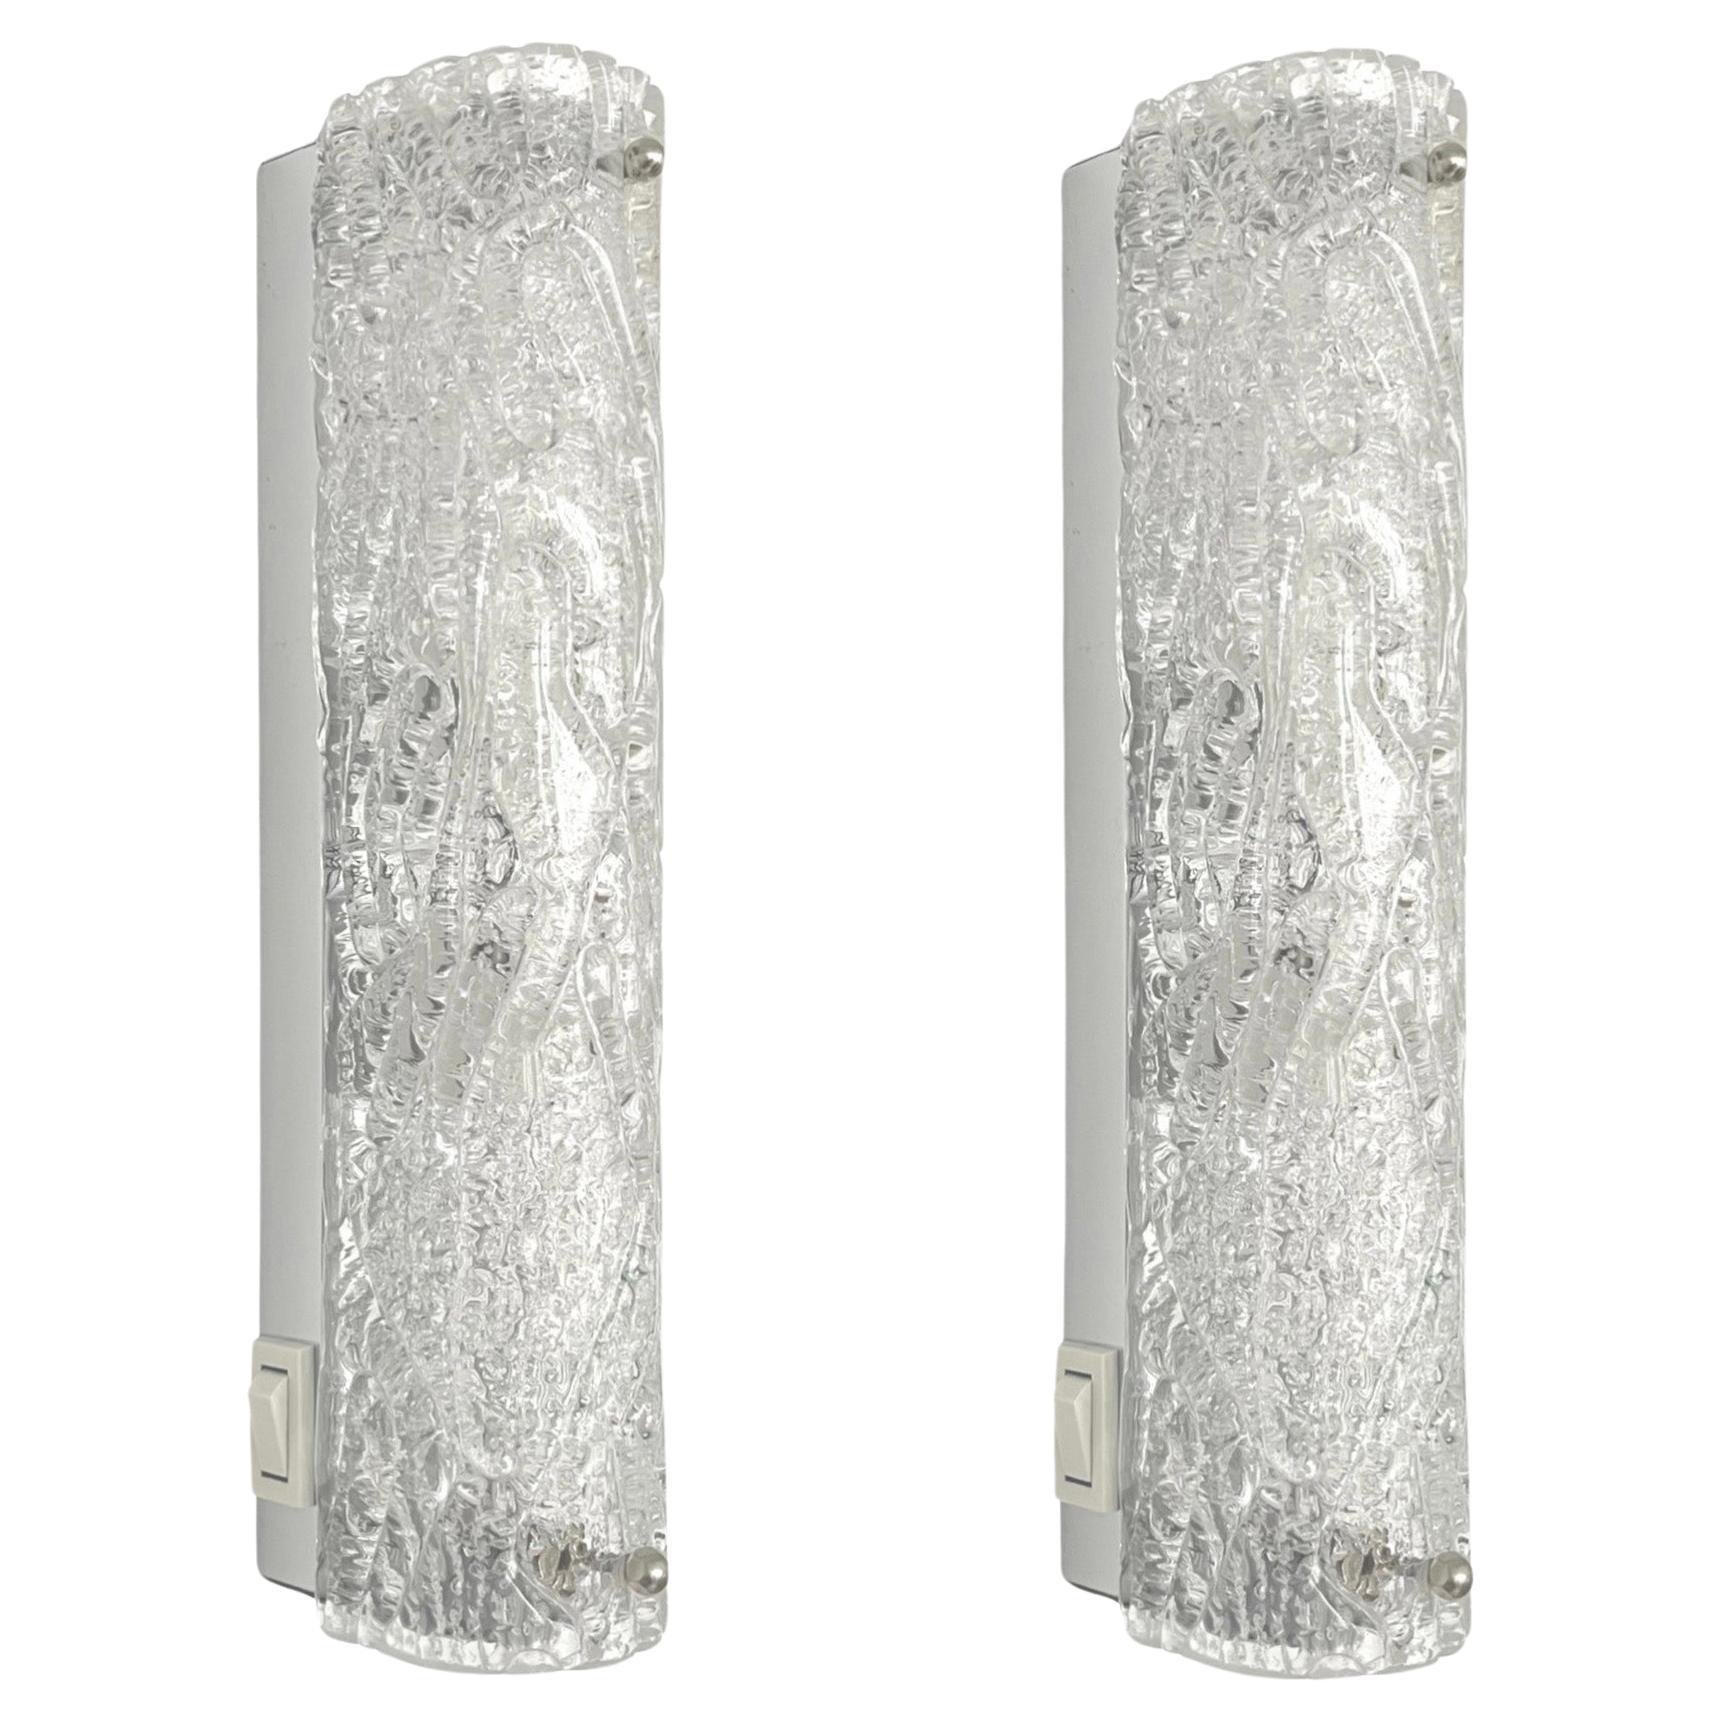 German Midcenturry Pair of Murano Ice-Glass Wall Sconces by Hillebrand, 1970s